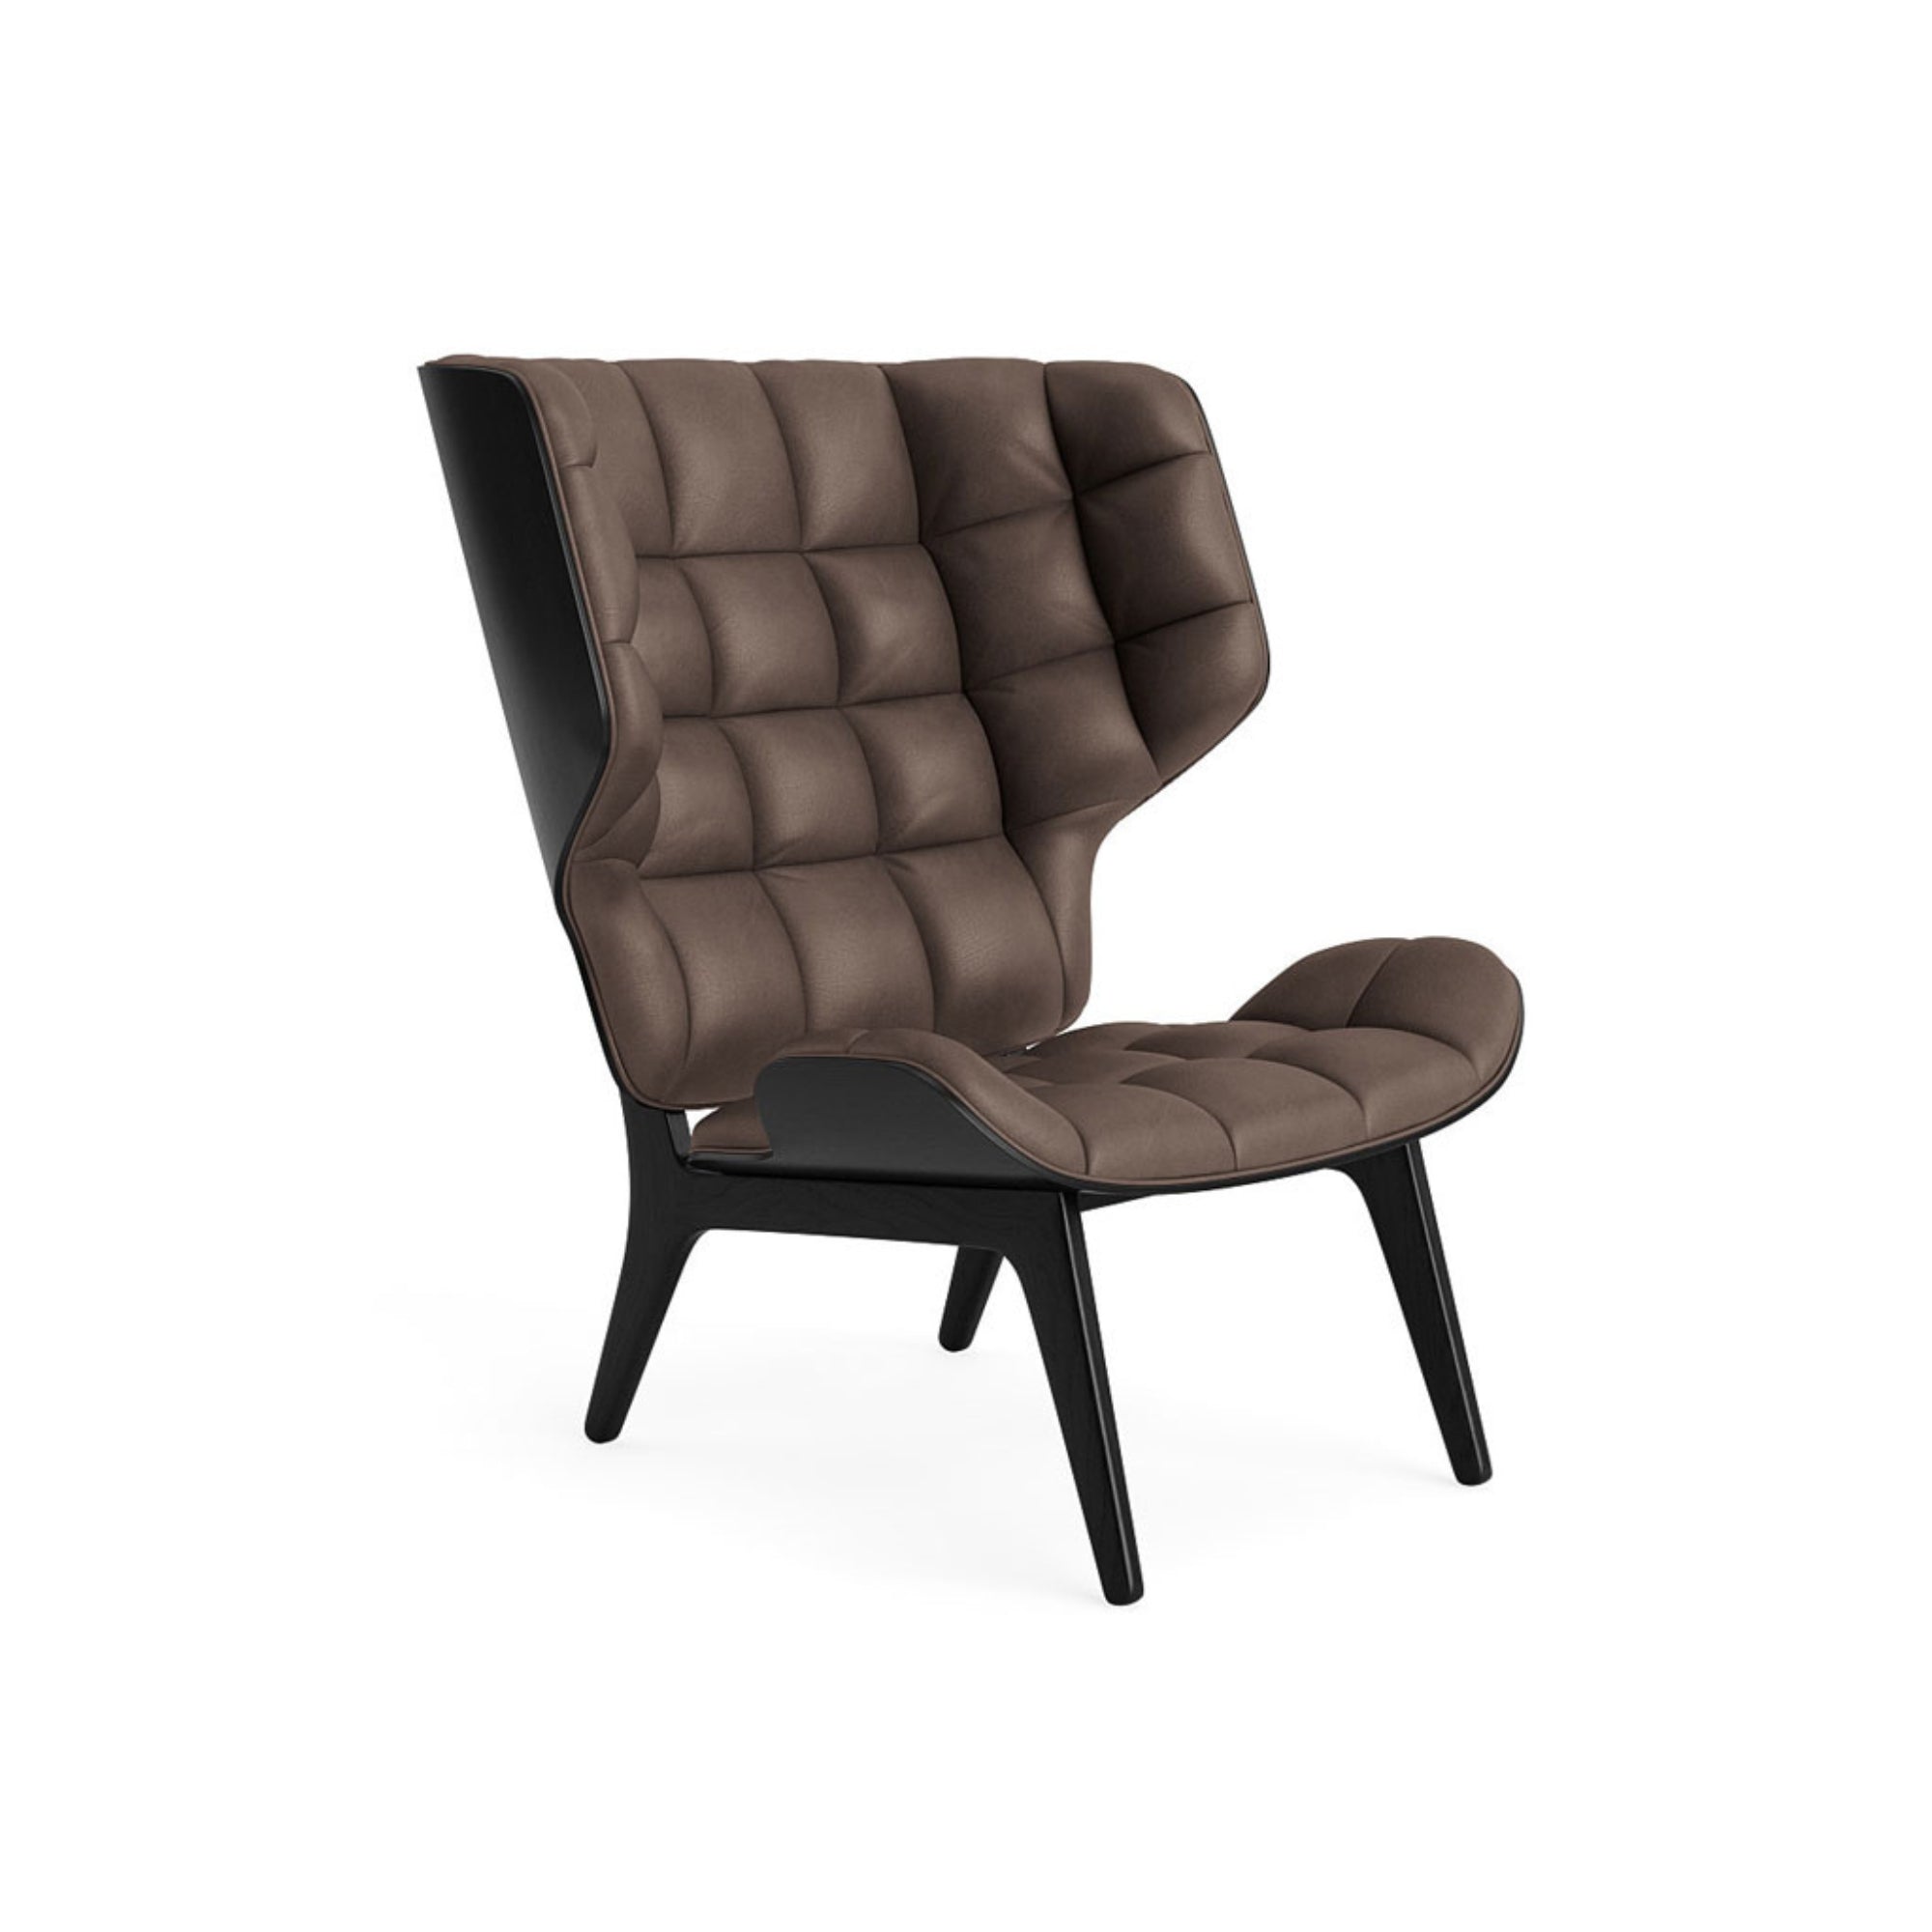 Mammoth Chair - Leather